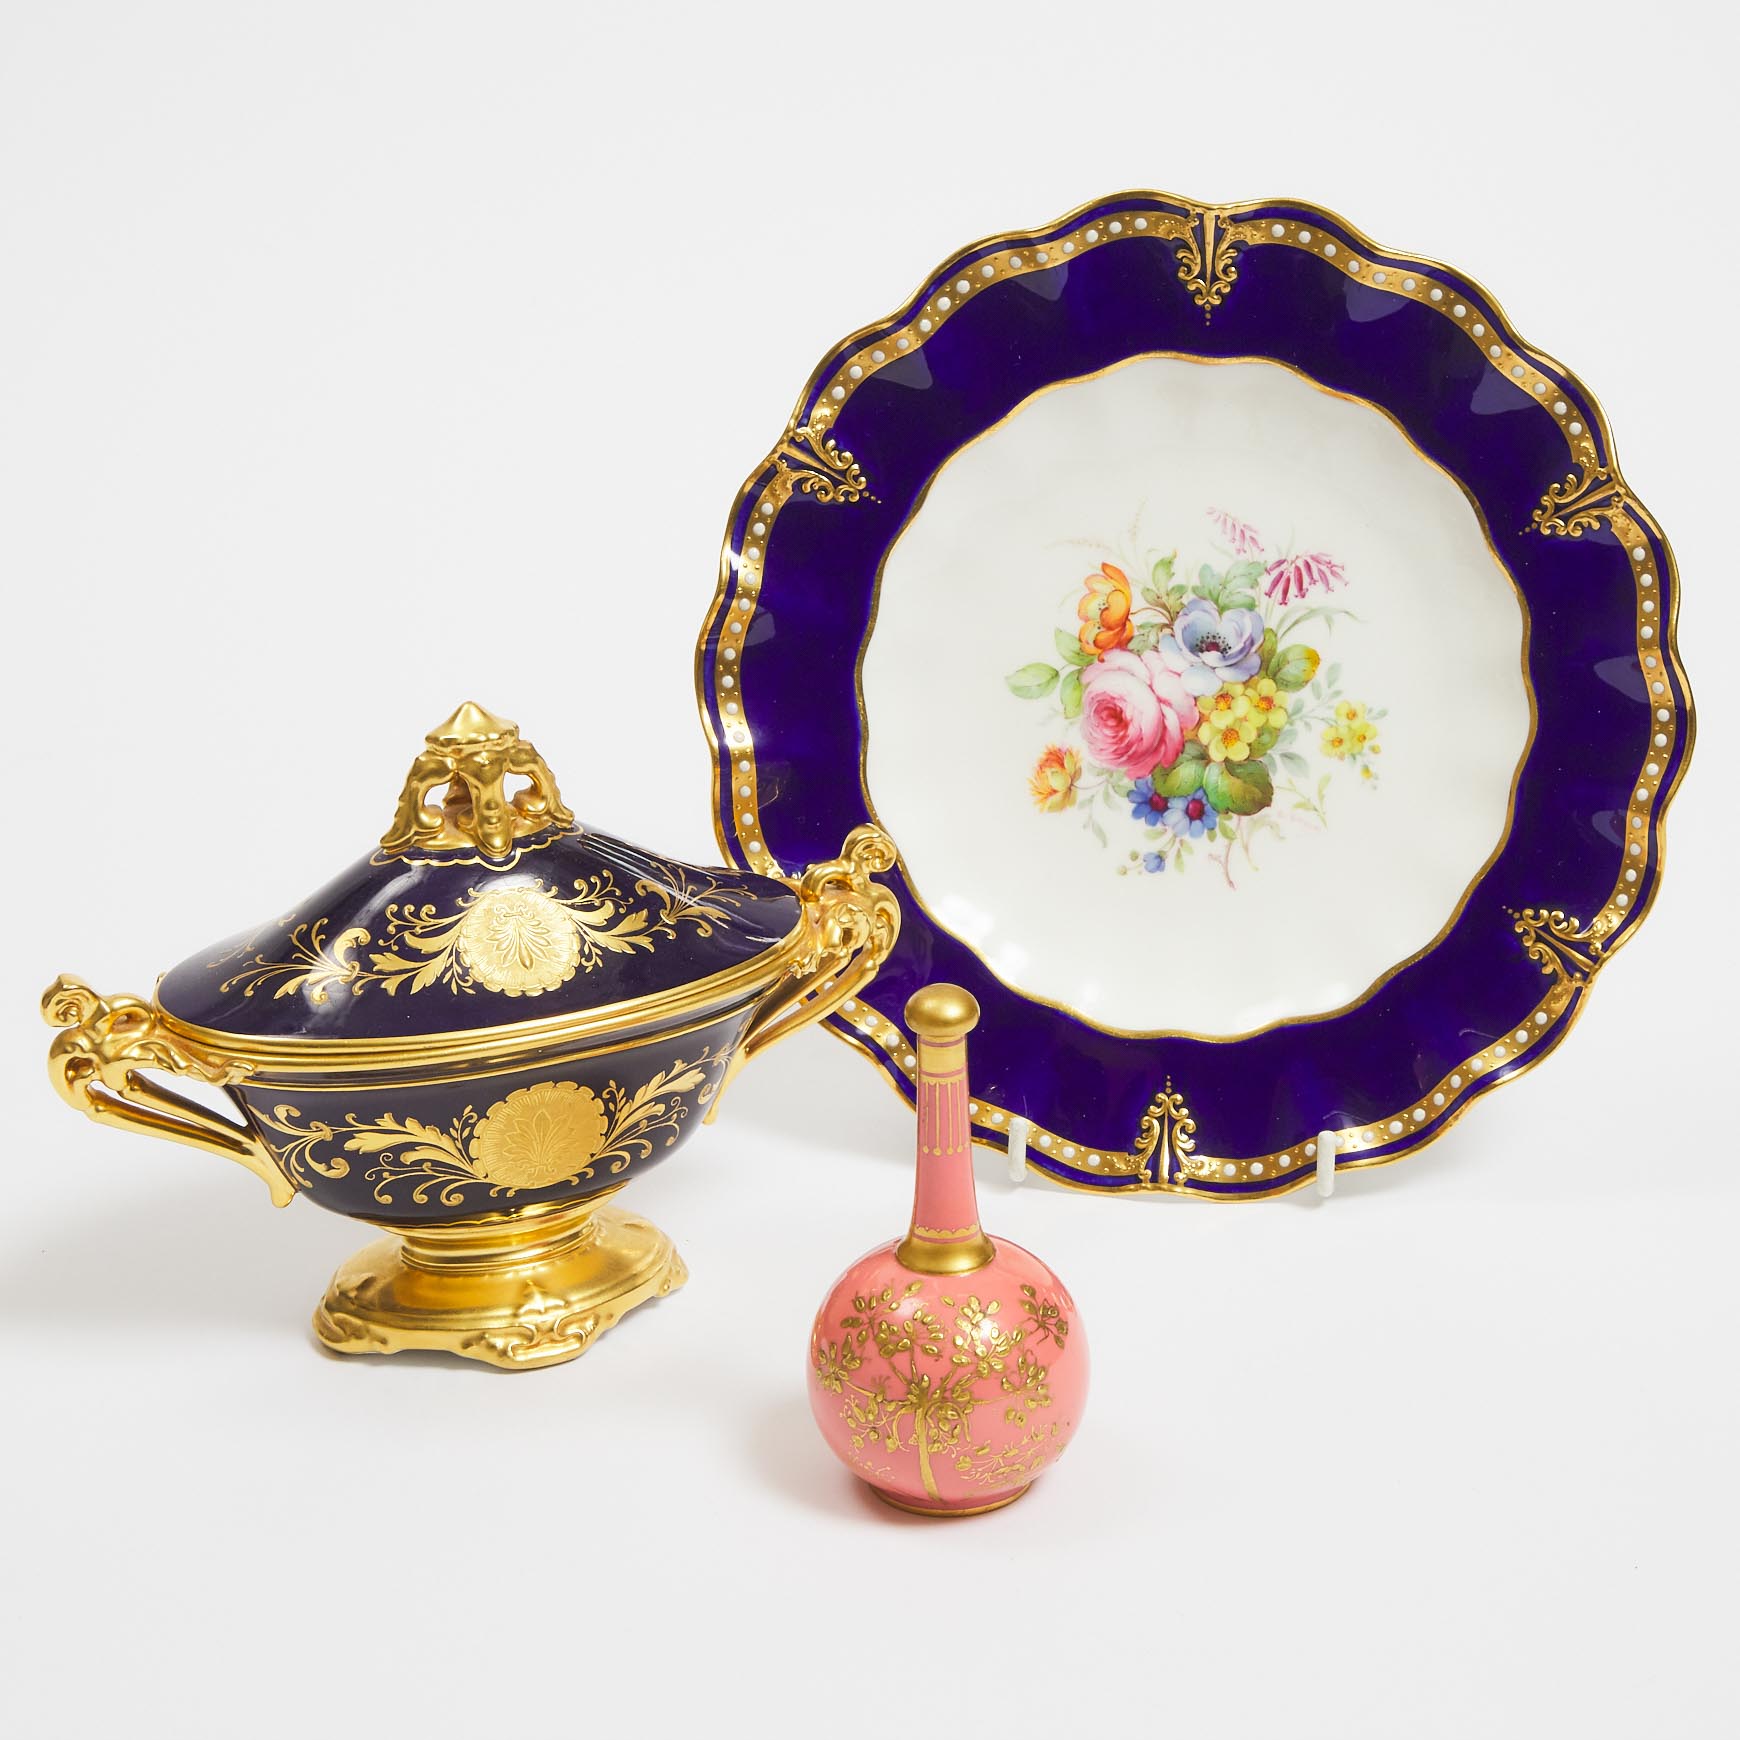 Royal Crown Derby Pink Ground Bottle with Stopper, Flower Painted Plate and a Blue and Gilt Covered Two-Handled Vase, c.1896/1933 and later